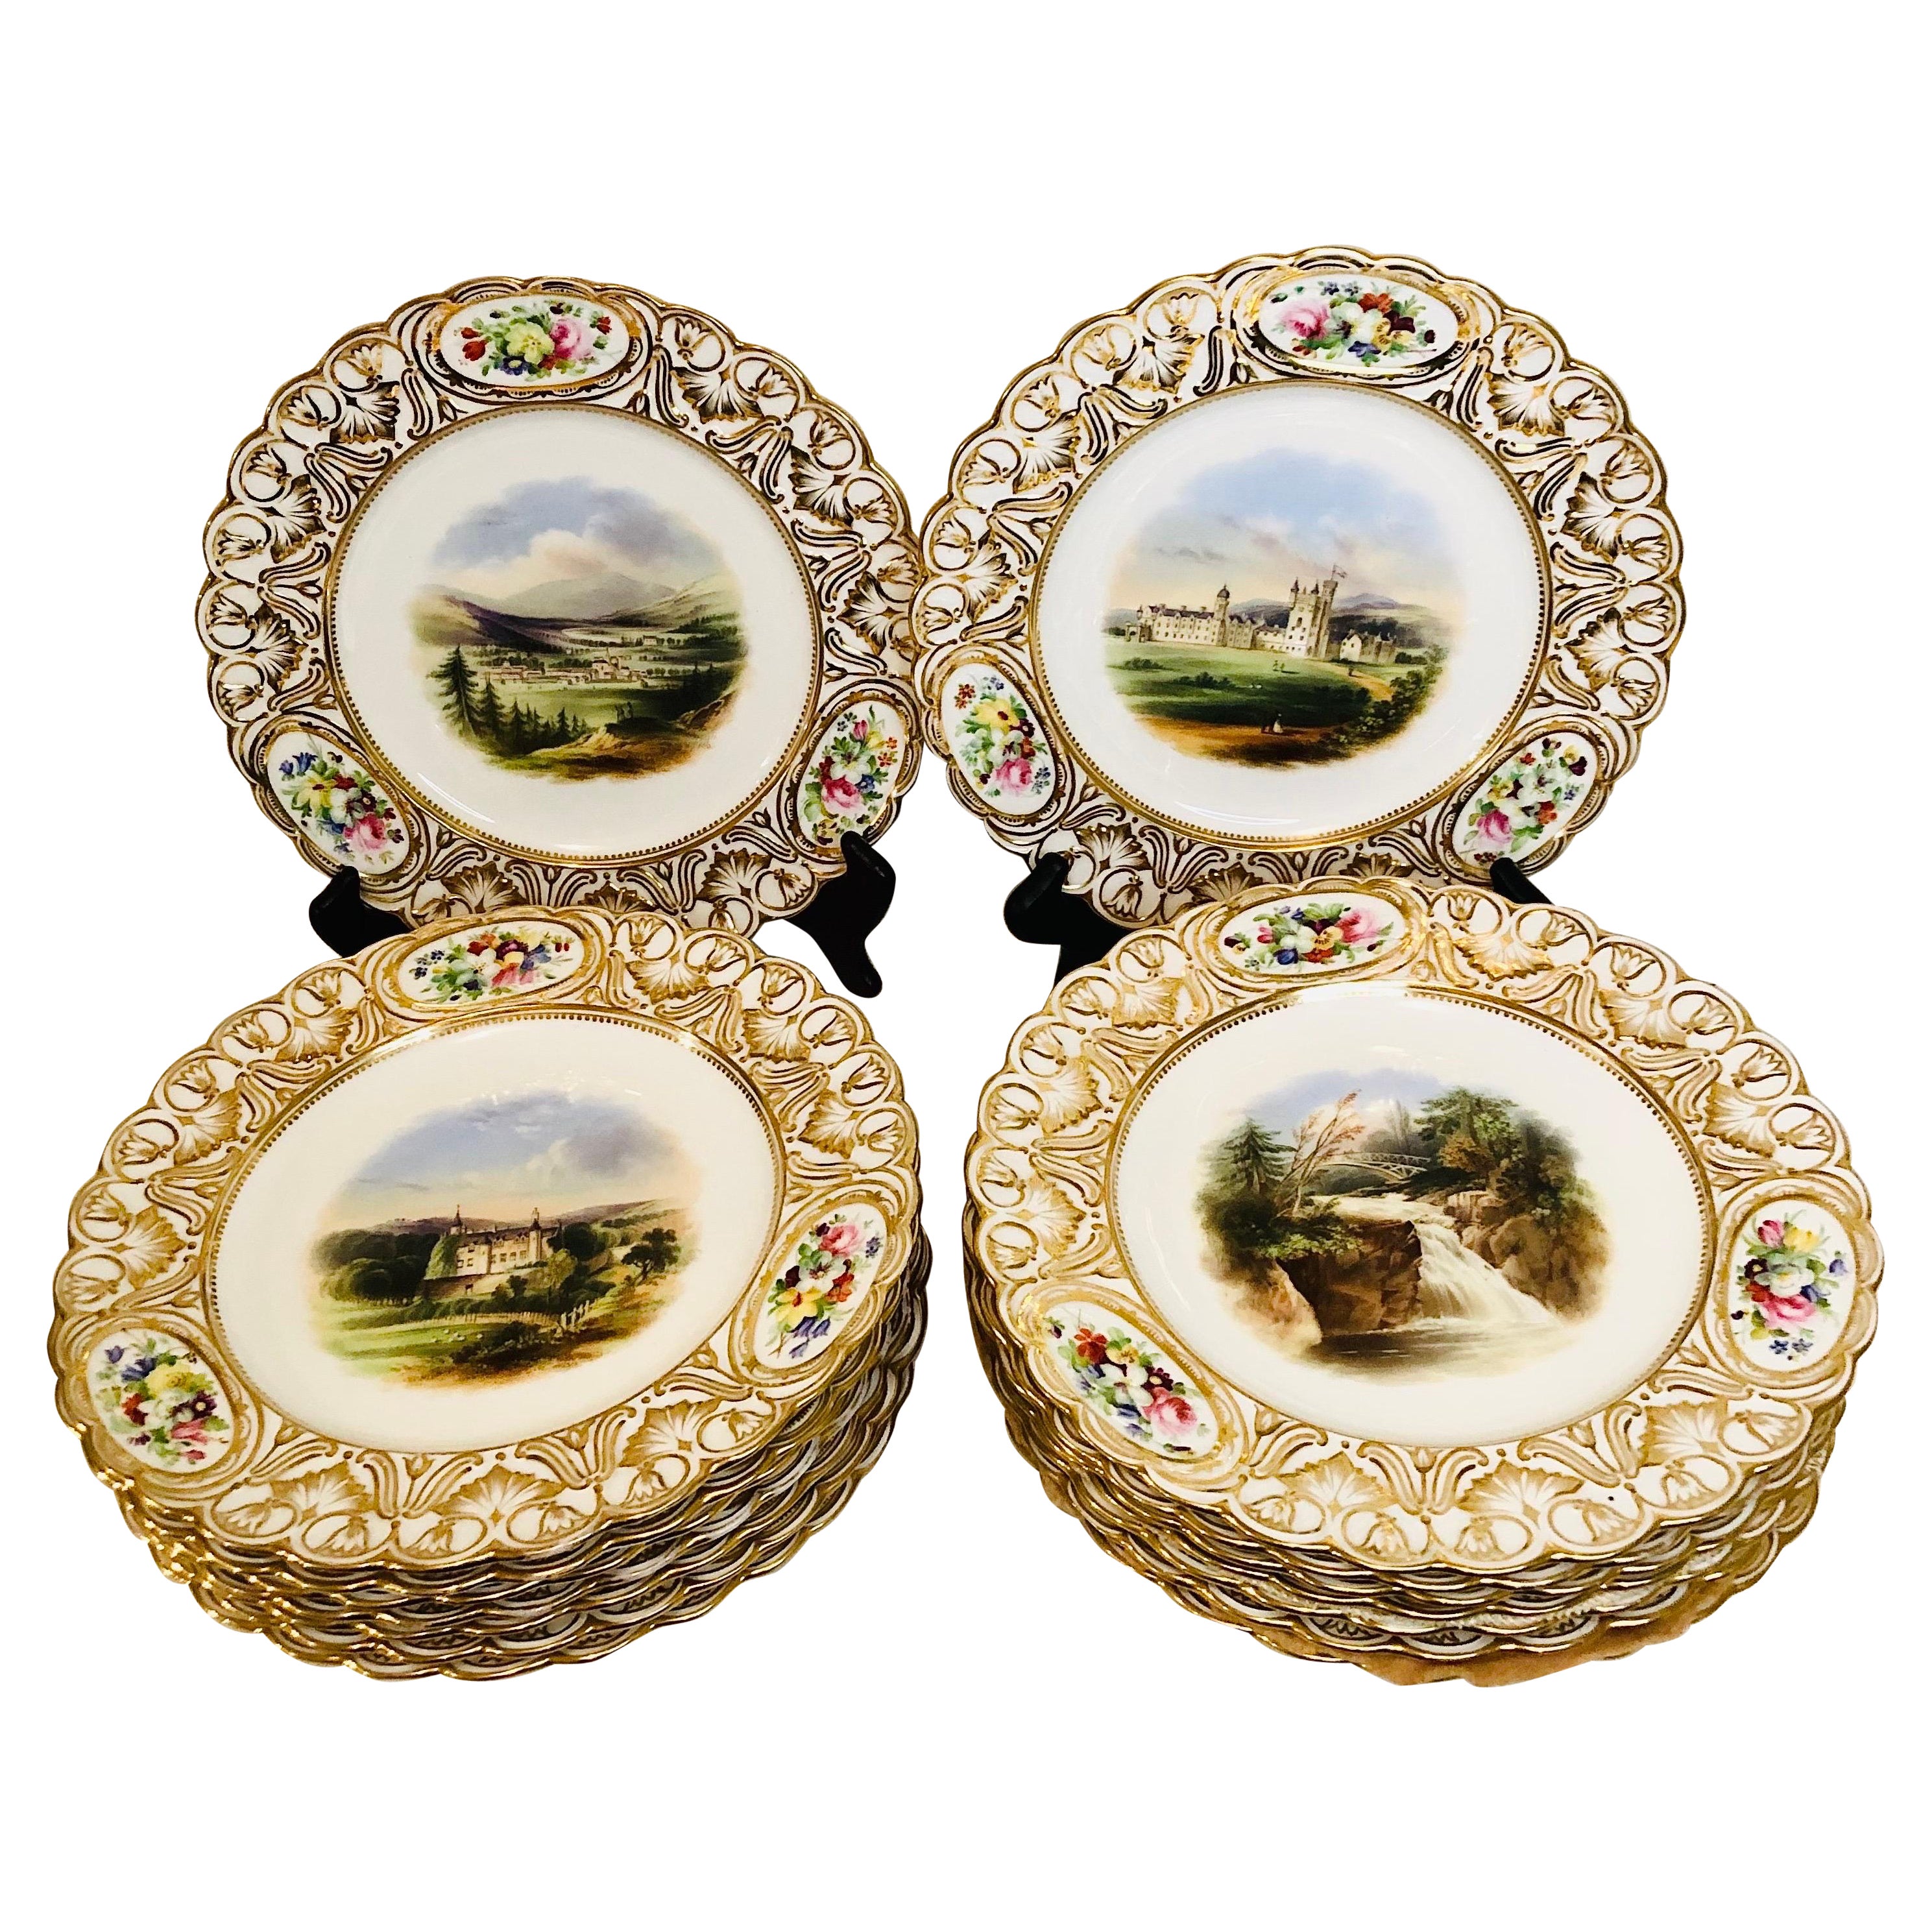 Set of 16 19th Century Coalport Plates Each Hand-Painted with Magnificent Scenes